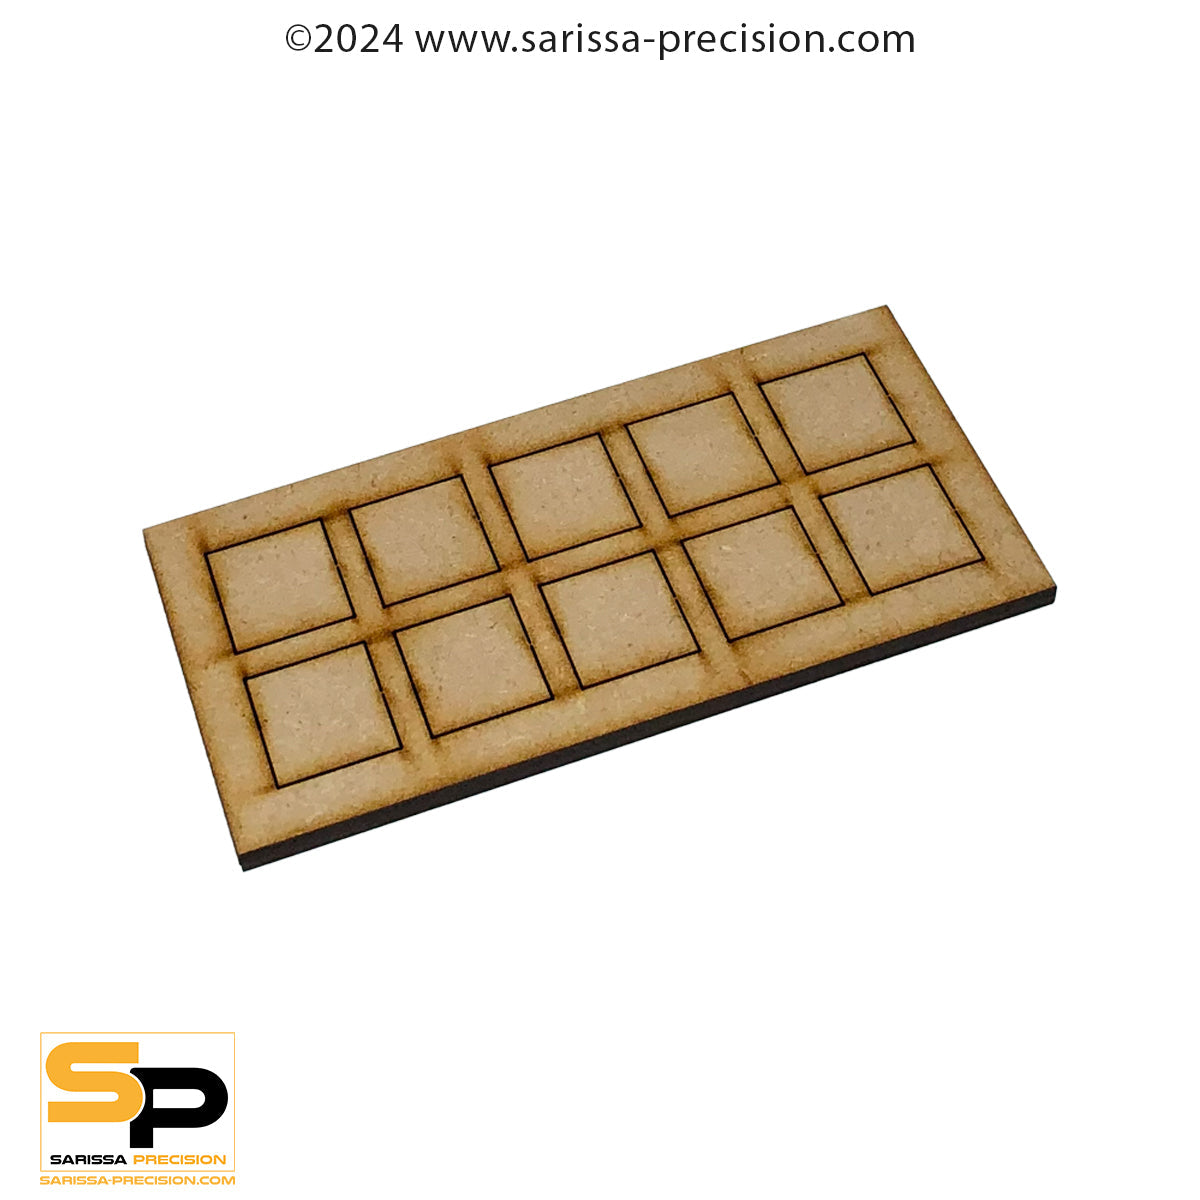 14x10 25x25mm Conversion Tray for 20x20mm bases